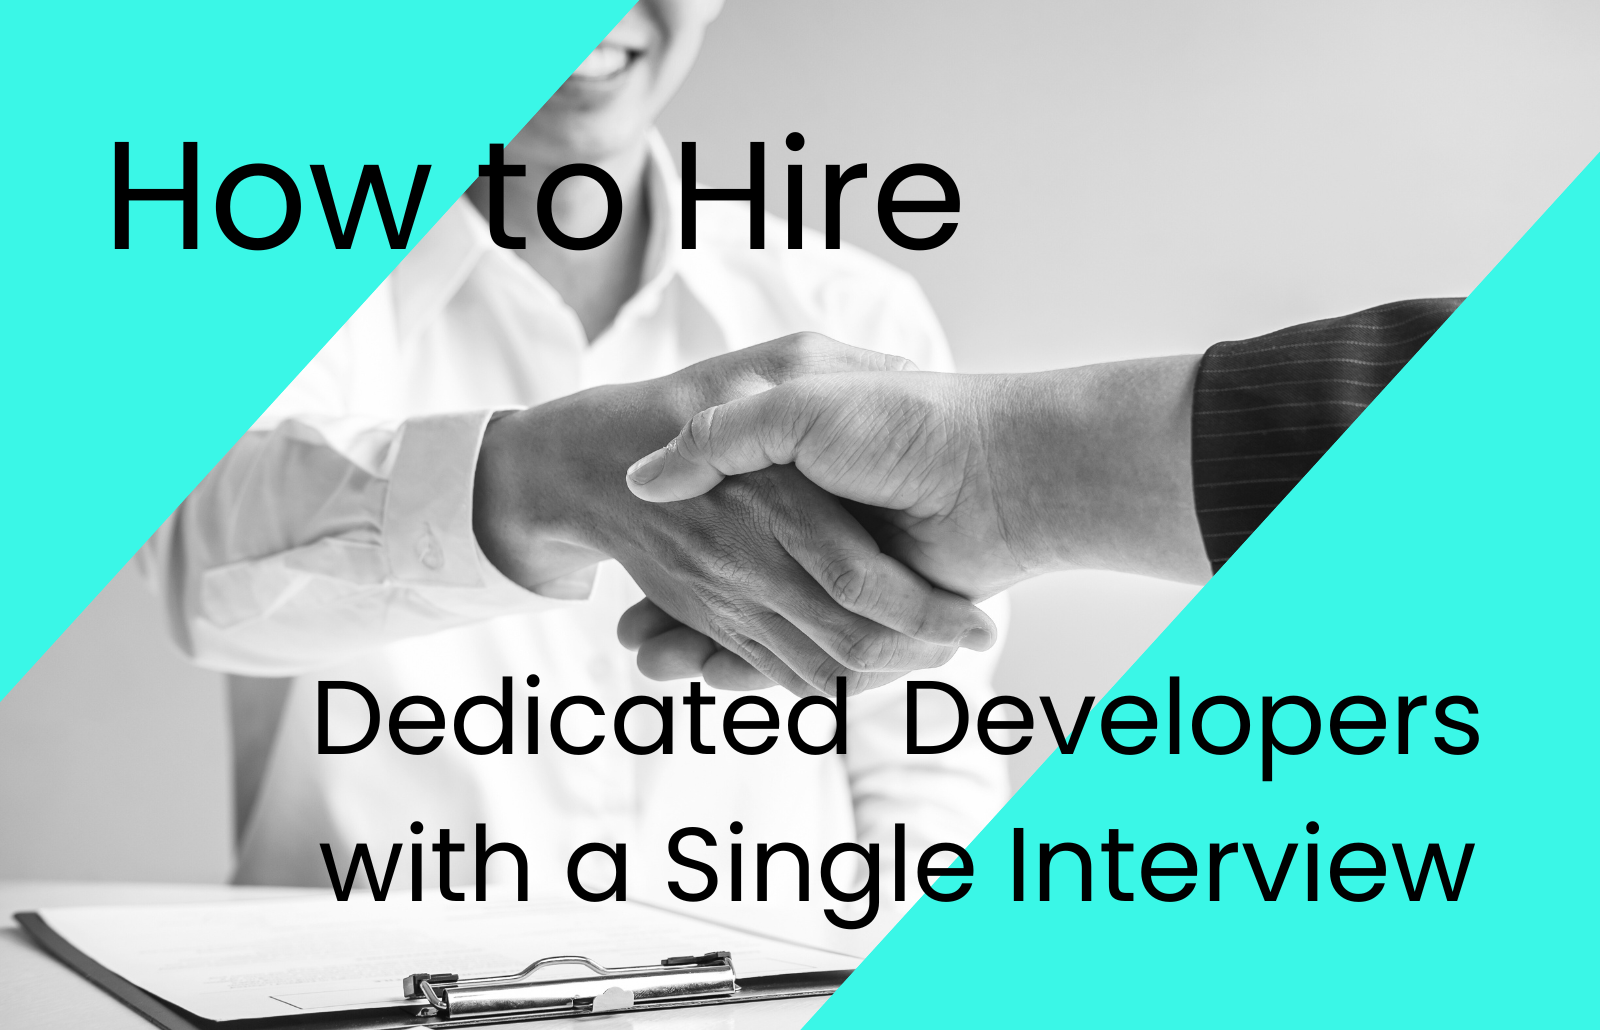 How to Hire Dedicated Developers with a Single Interview